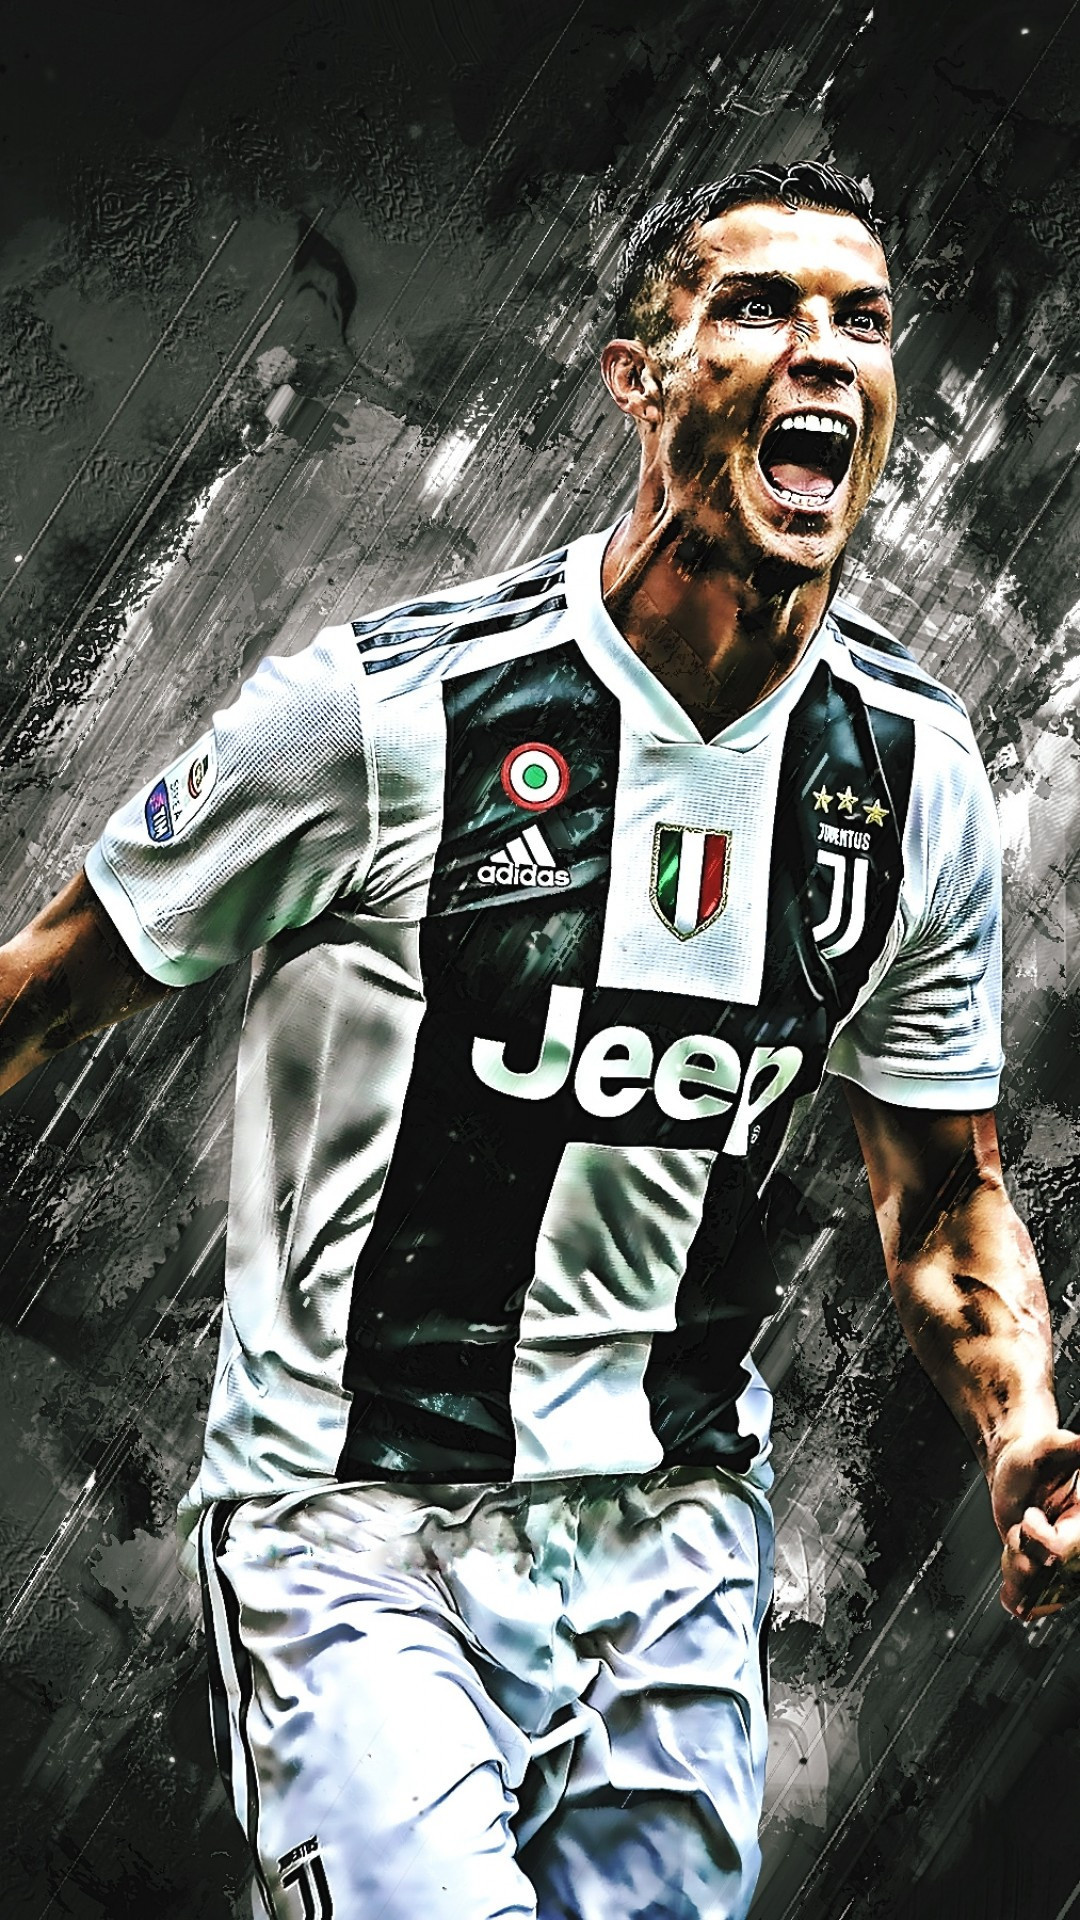 Juventus: Cristiano Ronaldo, Football player, known by his nickname 'CR7'. 1080x1920 Full HD Wallpaper.